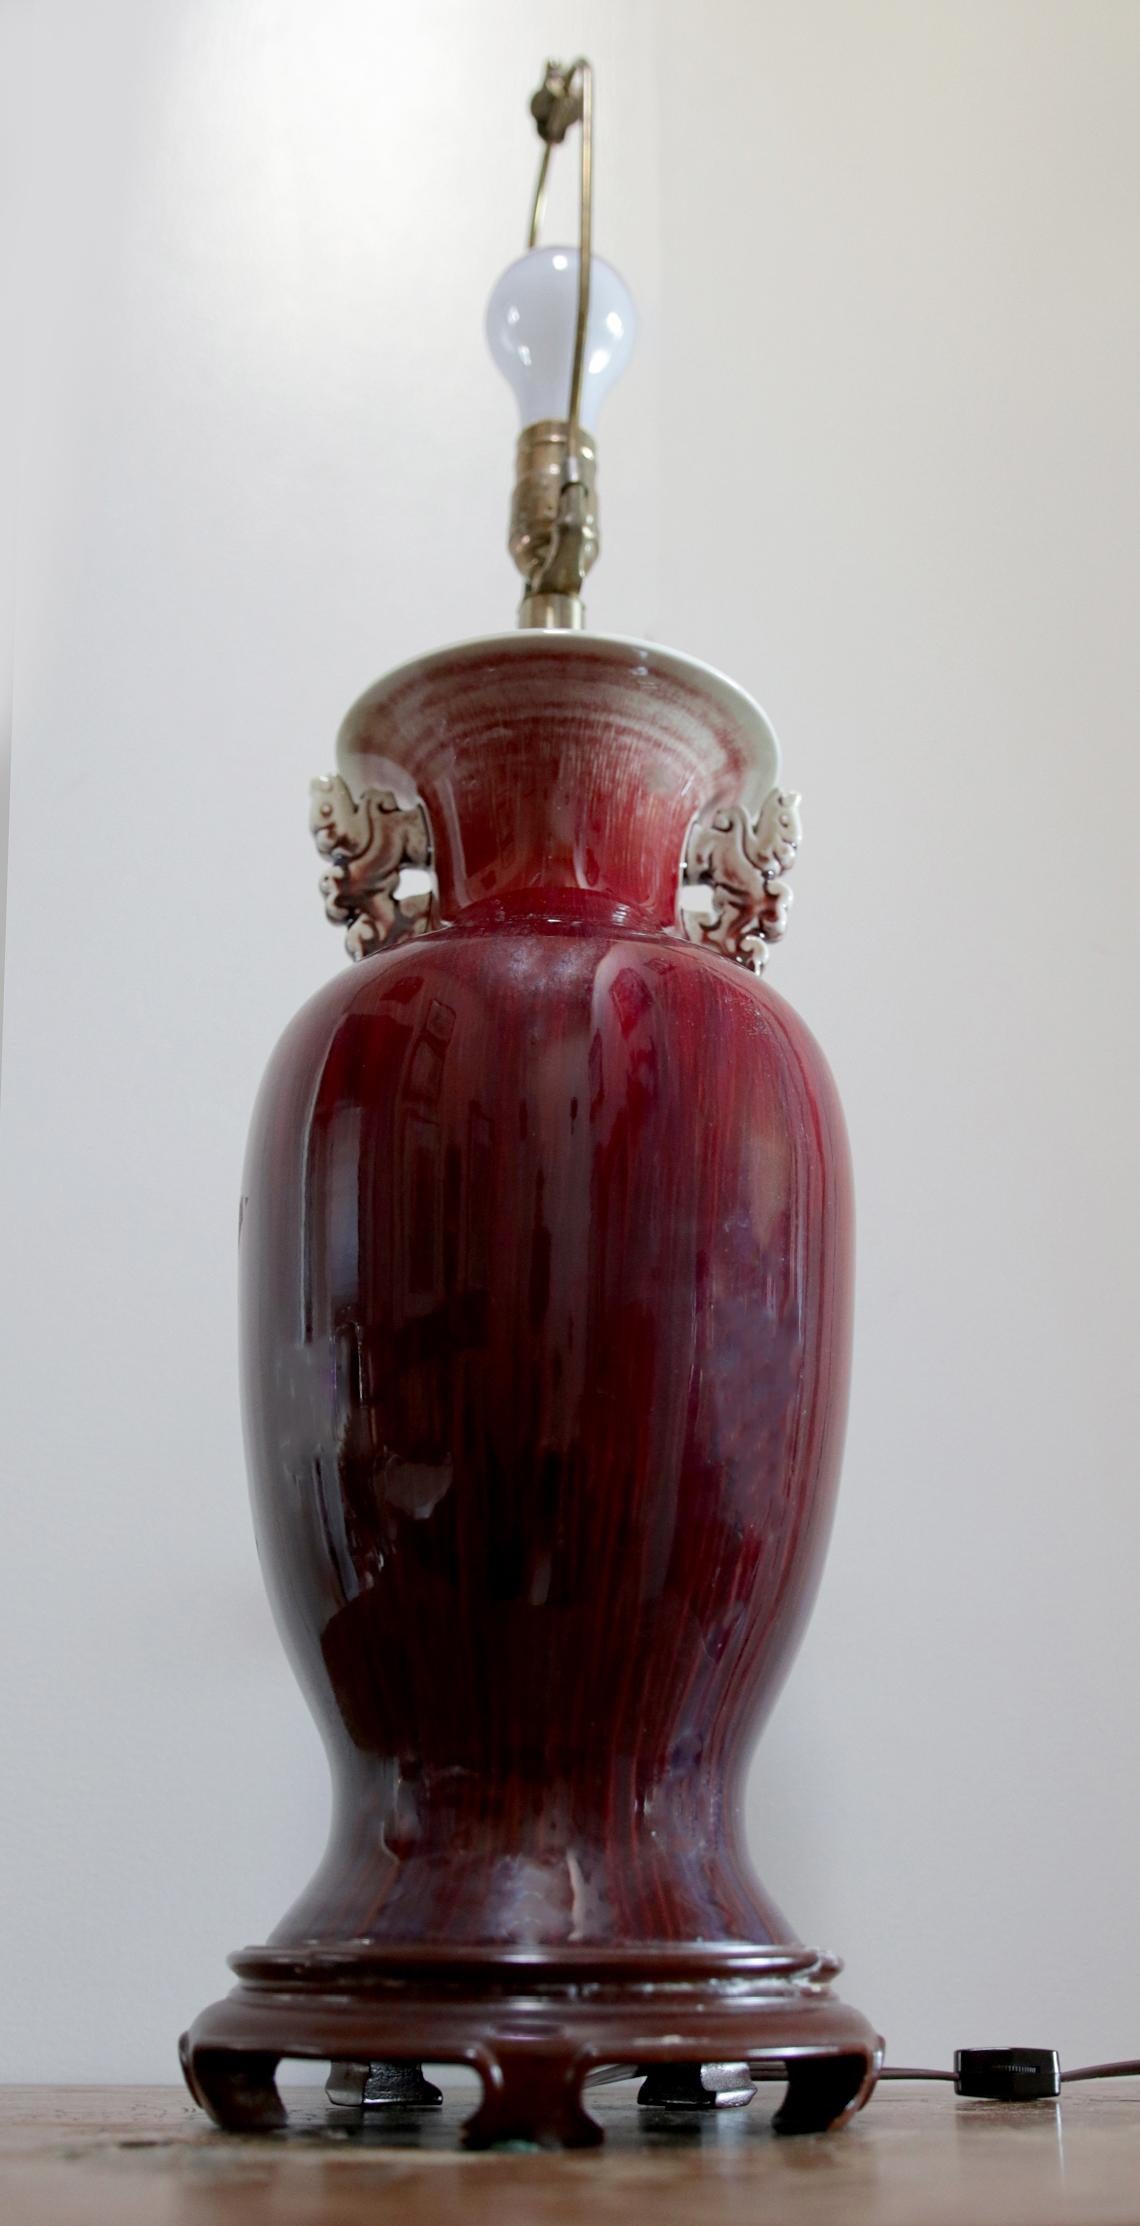 The intricately carved handles, or ears of this oxblood lamp cause it to stand out from the field of other lamps of this type. This piece is a 19th century sang de boeuf 